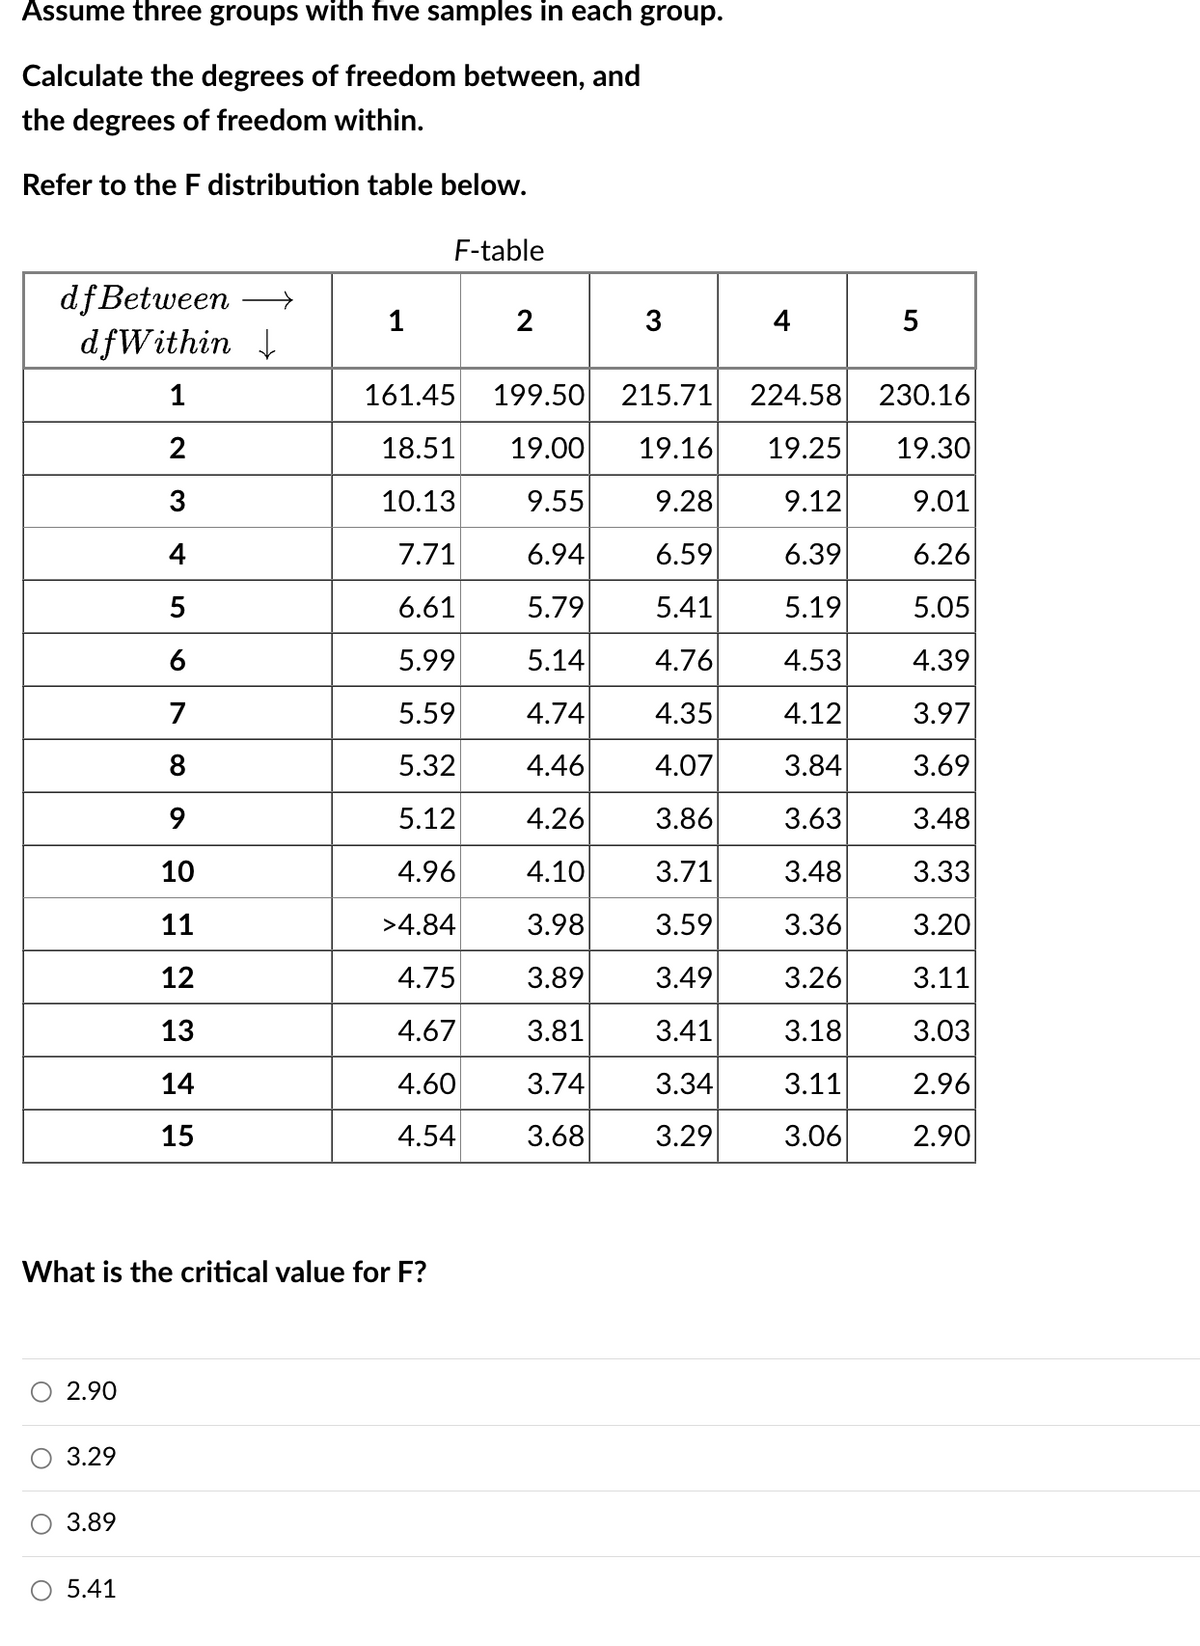 Assume three groups with five samples in each group.
Calculate the degrees of freedom between, and
the degrees of freedom within.
Refer to the F distribution table below.
df Between →
dfWithin ↓↓
1
2
3
4
5
6
7
8
9
10
11
12
13
14
15
O
What is the critical value for F?
2.90
3.29
3.89
1
5.41
F-table
161.45
18.51
10.13
7.71
6.61
5.99
5.59
5.32
5.12
4.96
>4.84
4.75
4.67
4.60
4.54
199.50
19.00
9.55
6.94
5.79
5.14
4.74
4.46
4.26
4.10
3.98
3.89
3.81
3.74
3.68
4
5
215.71 224.58
230.16
19.16 19.25 19.30
9.28
9.12
9.01
6.59
6.39
6.26
5.41
5.19
5.05
4.76
4.53
4.39
4.35
4.12
3.97
4.07
3.84
3.69
3.86
3.63
3.48
3.71
3.48
3.33
3.59
3.36
3.20
3.49
3.26
3.11
3.41
3.18
3.03
3.34
3.11
2.96
3.29
3.06
2.90